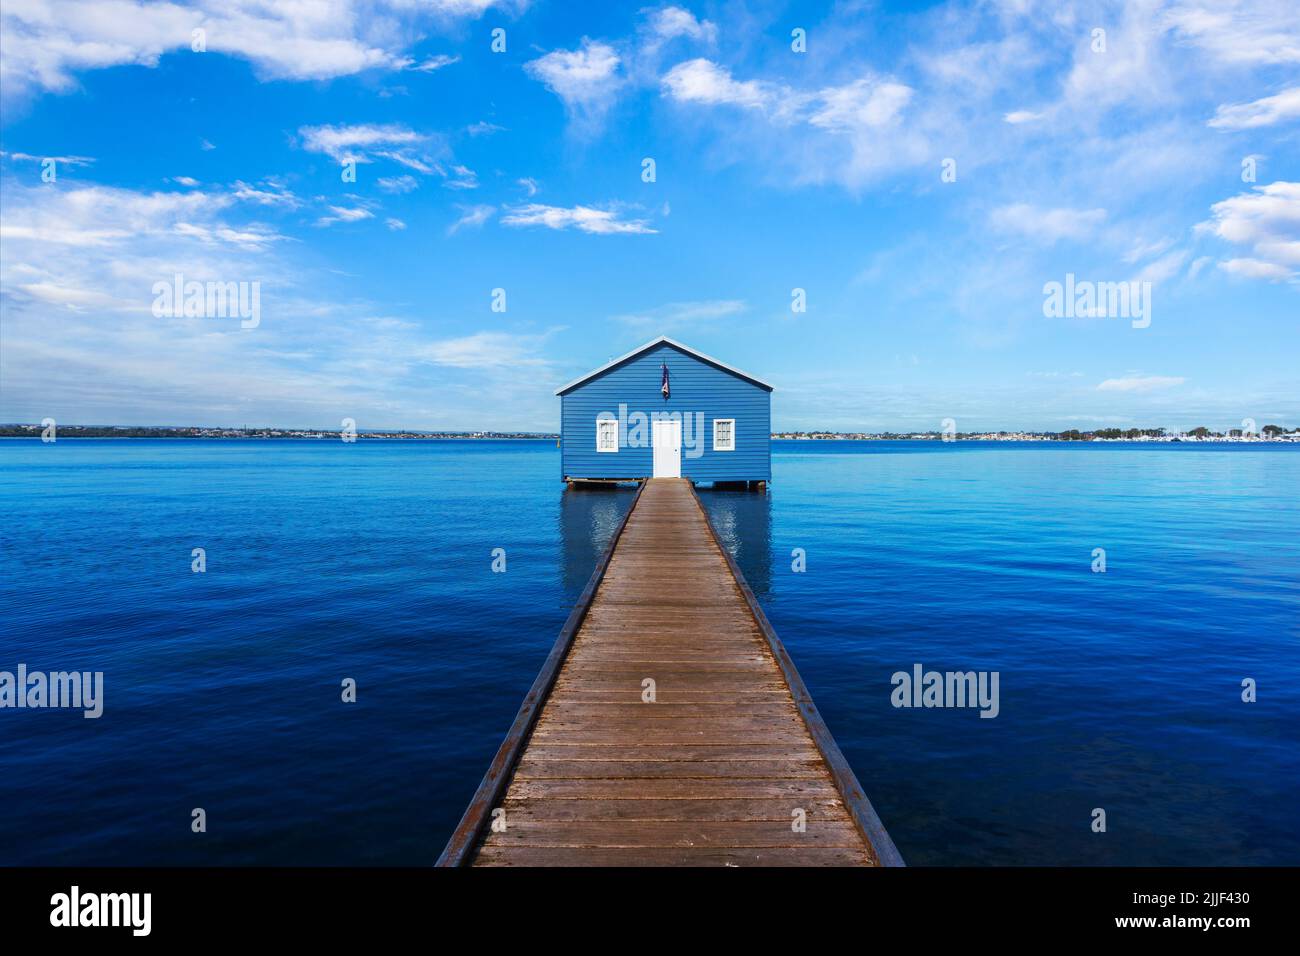 Charming blue boathouse at the end of a pier in Crawley, Western Australia. Built in the 1930s, the tourist popular boatshed is one of the most photog Stock Photo